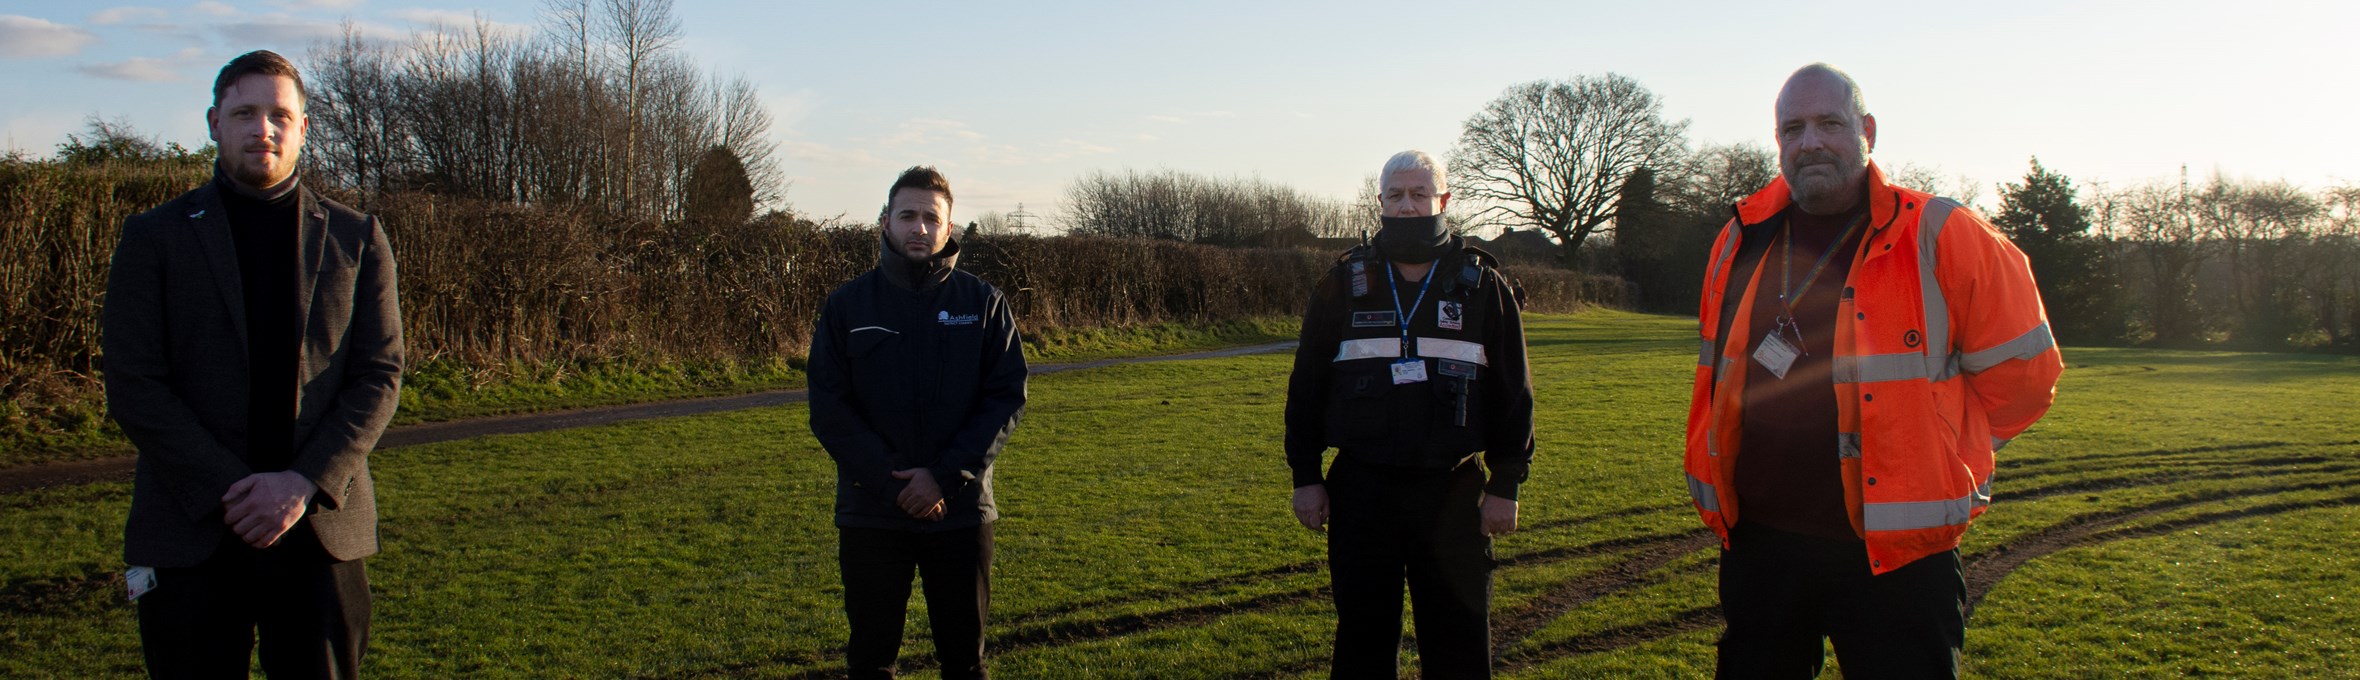 Cllr Grounds, with ADC officers on Kingsway Park, Kirkby 